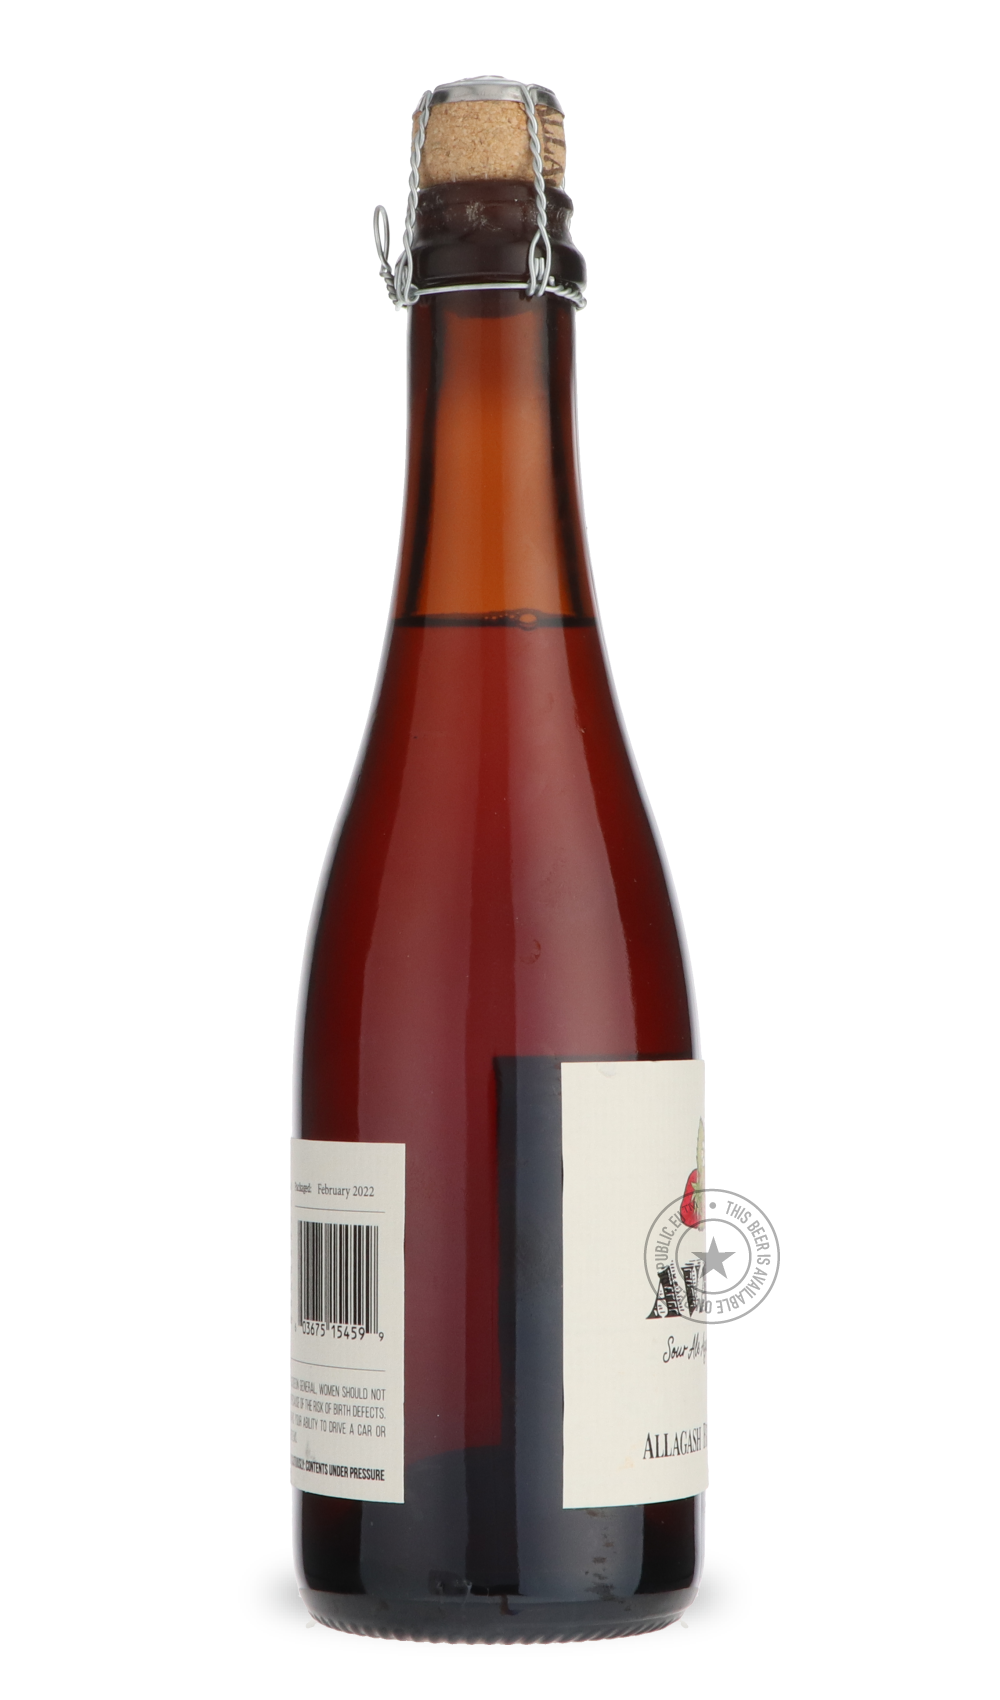 -Allagash- Avancé-Sour / Wild & Fruity- Only @ Beer Republic - The best online beer store for American & Canadian craft beer - Buy beer online from the USA and Canada - Bier online kopen - Amerikaans bier kopen - Craft beer store - Craft beer kopen - Amerikanisch bier kaufen - Bier online kaufen - Acheter biere online - IPA - Stout - Porter - New England IPA - Hazy IPA - Imperial Stout - Barrel Aged - Barrel Aged Imperial Stout - Brown - Dark beer - Blond - Blonde - Pilsner - Lager - Wheat - Weizen - Amber 